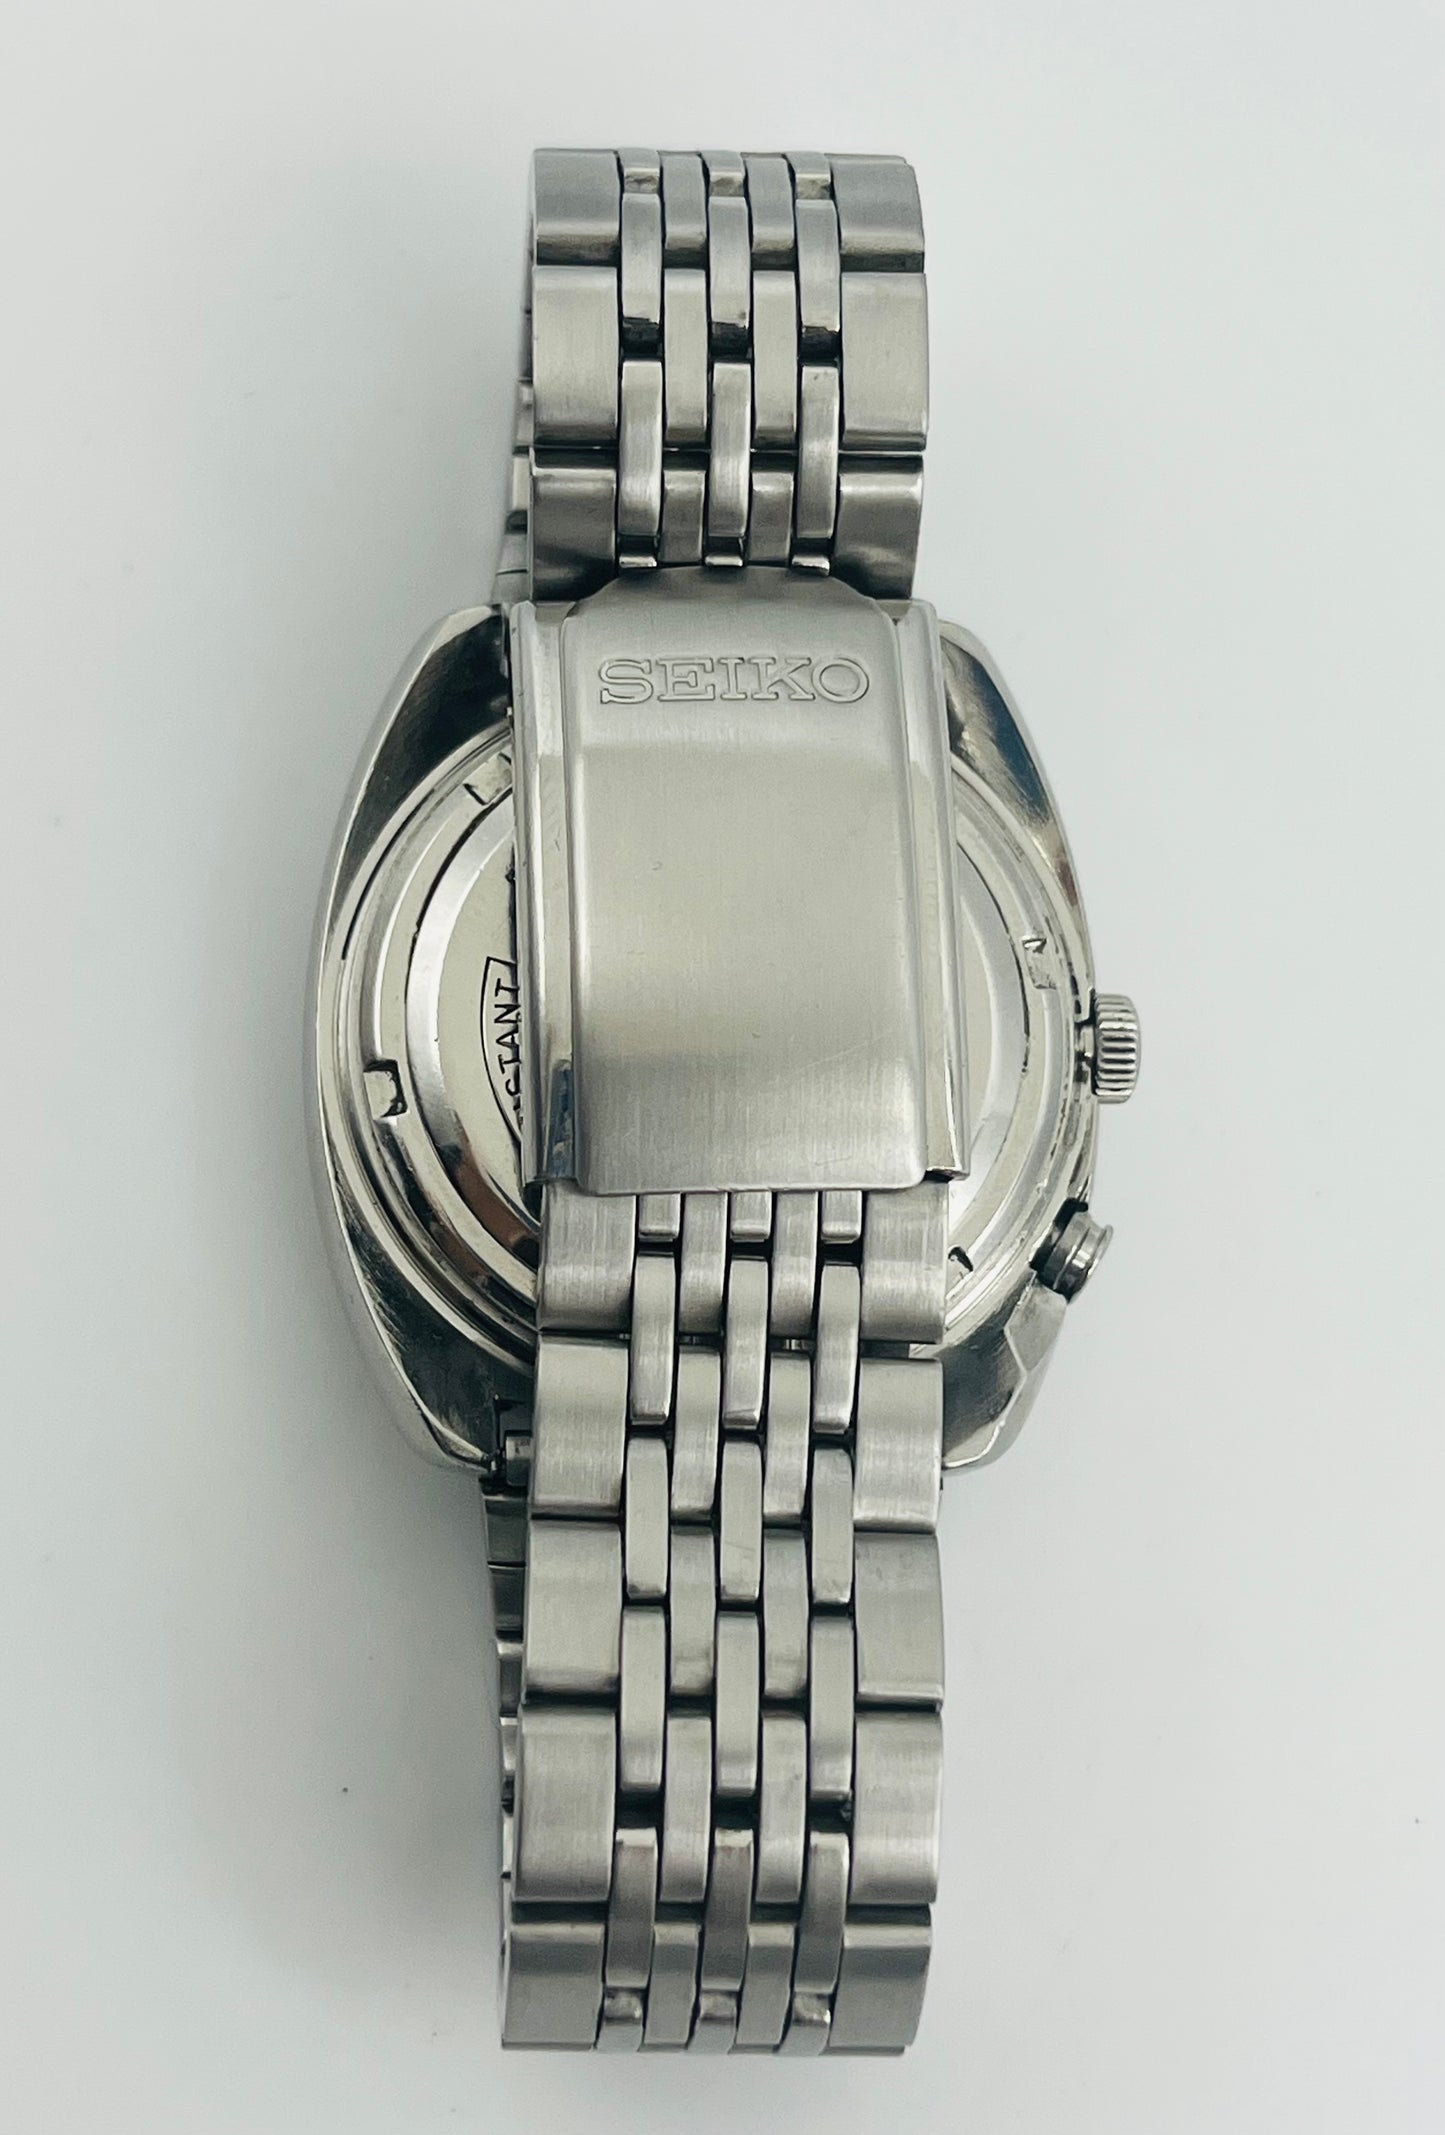 1971 Seiko Bell-Matic Extremely rare